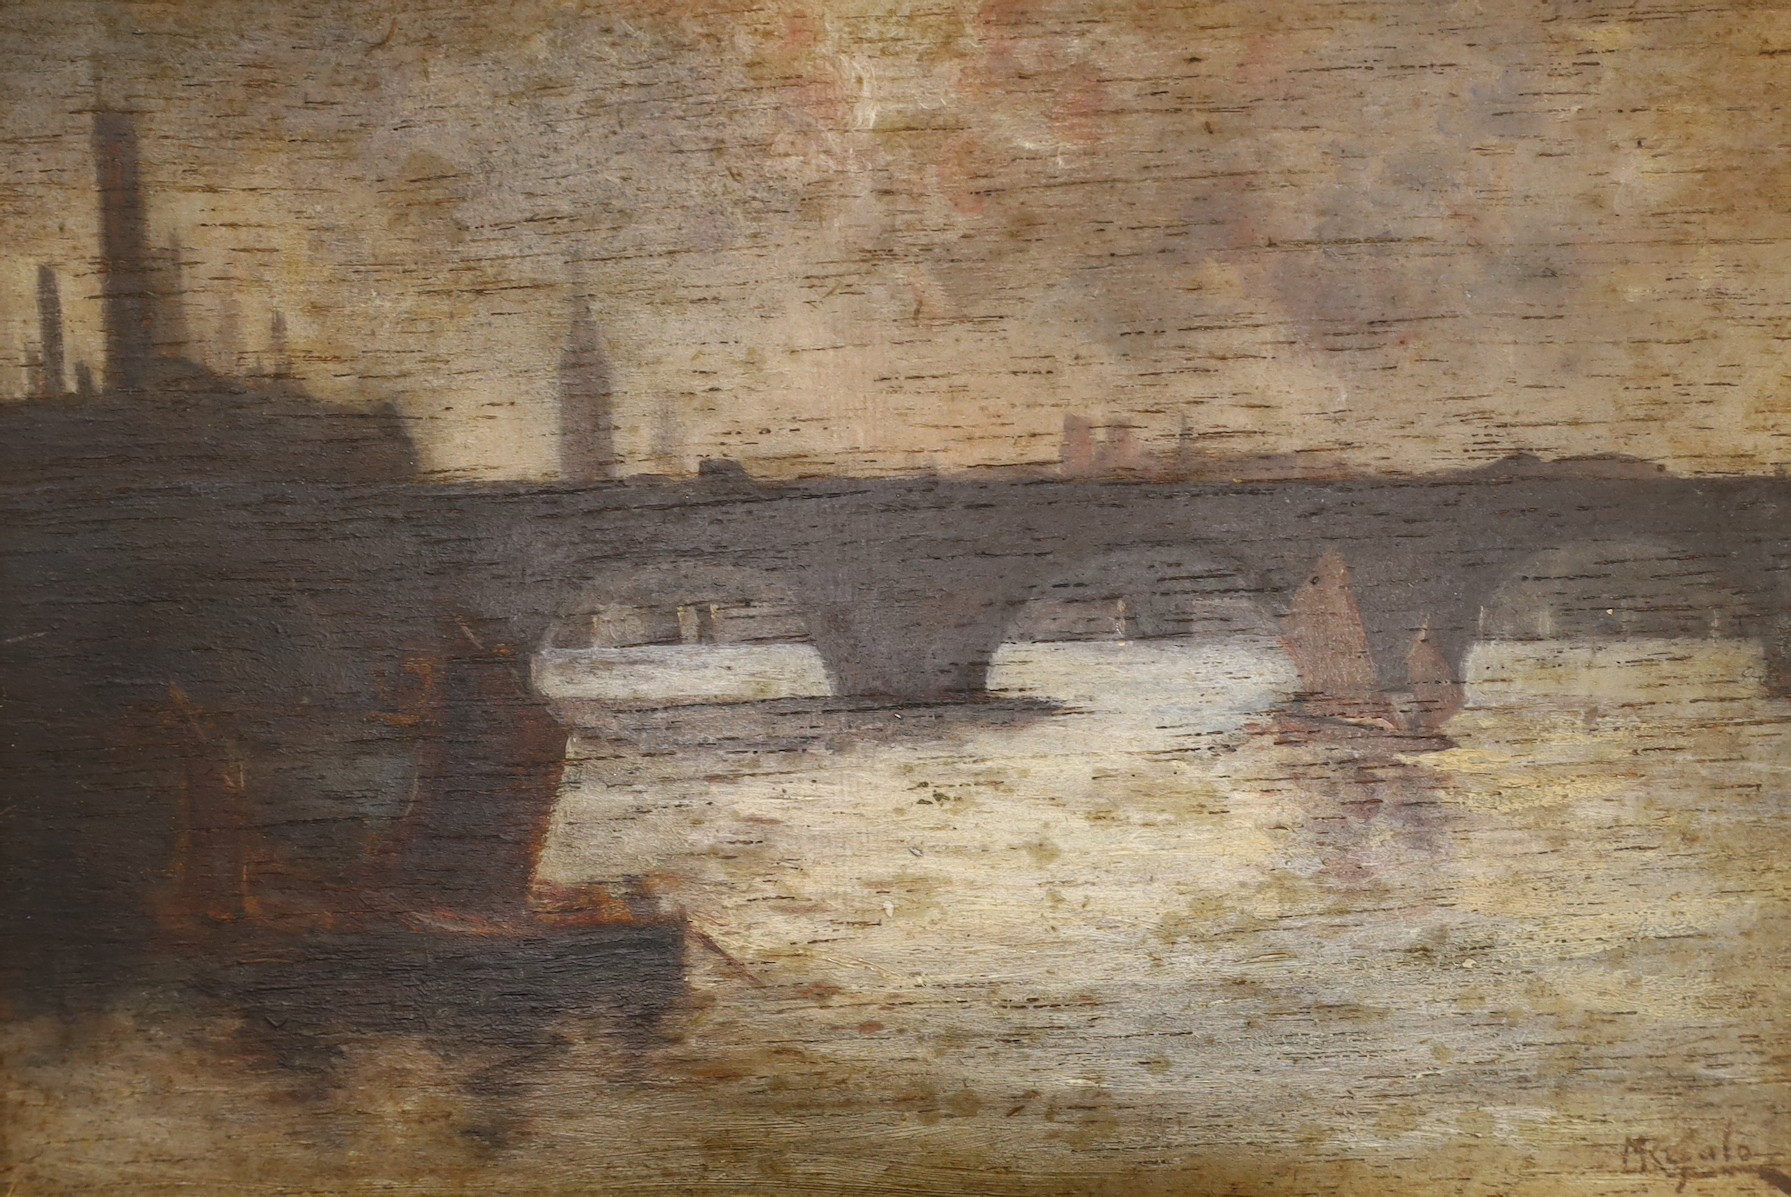 M.K. Galo, two oils on board, 'The Thames at Twilight' and a similar scene, one signed, 14 x 22cm and 12 x 22cm